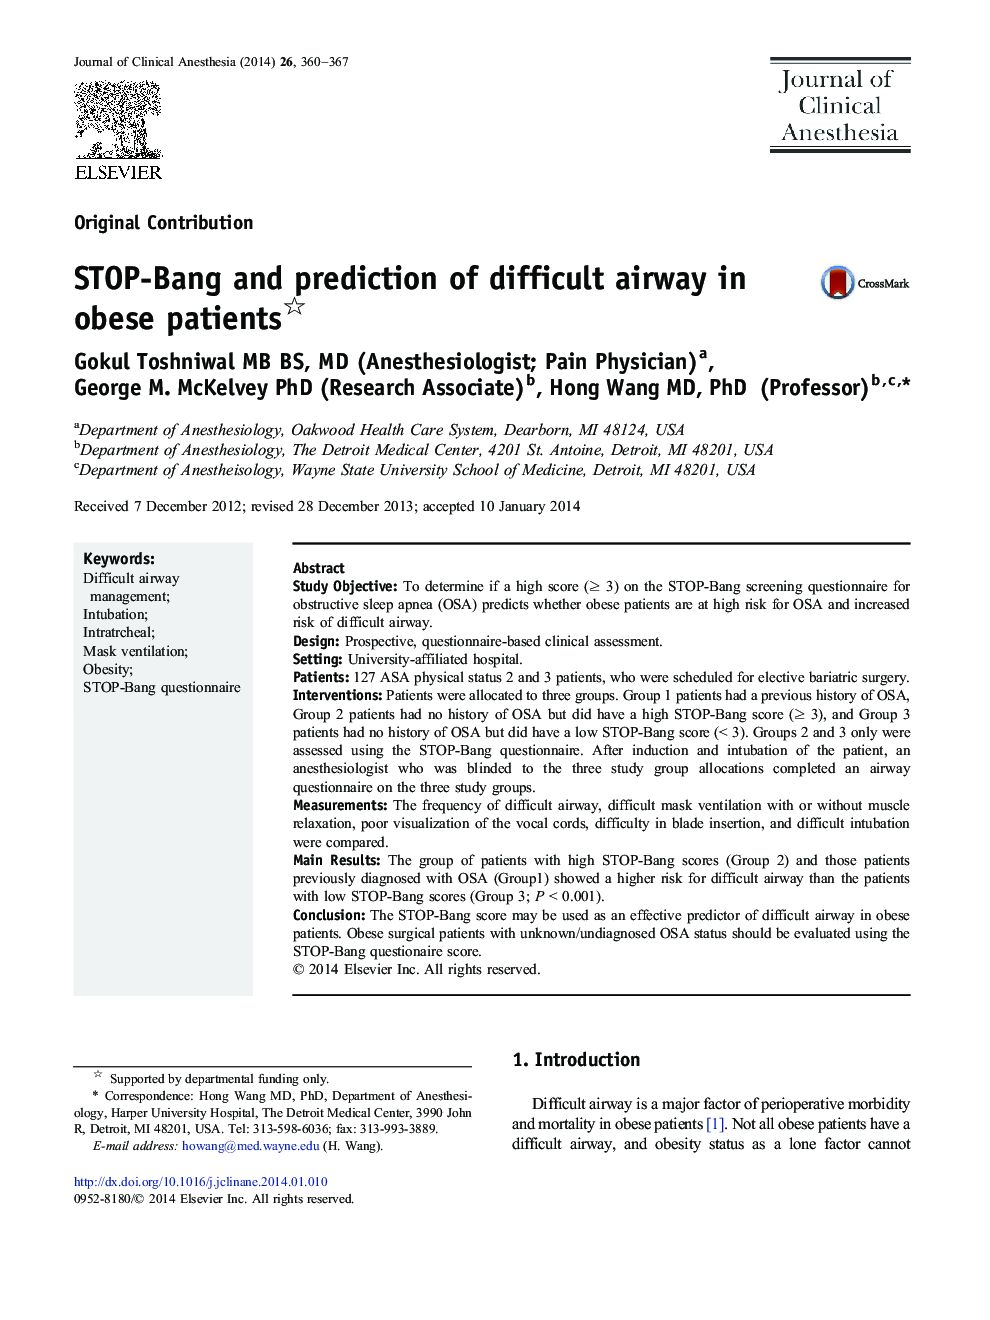 STOP-Bang and prediction of difficult airway in obese patients 